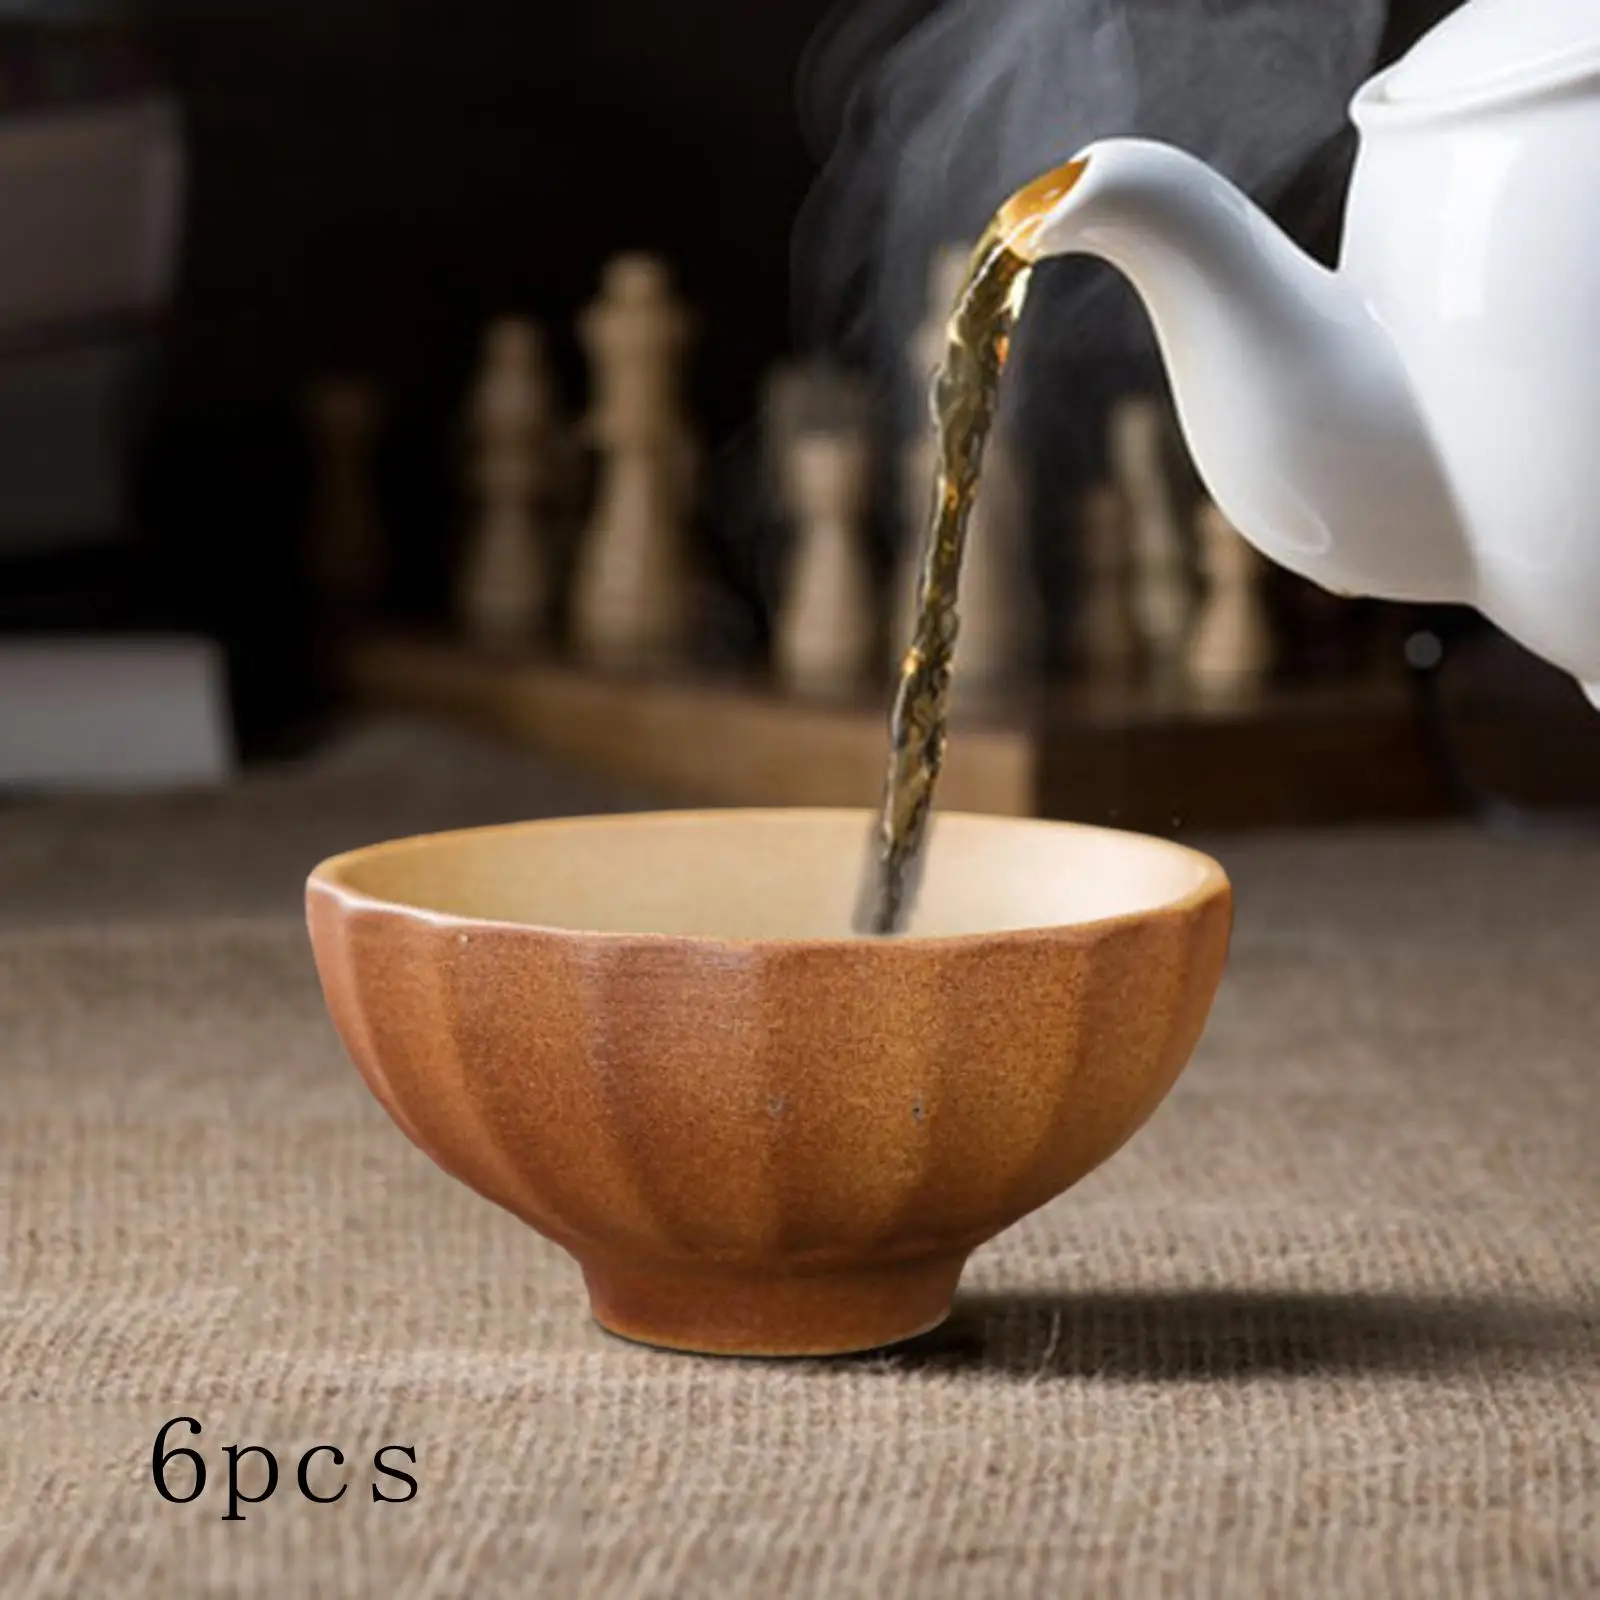 6Pcs Teacup Set Stoves Boiled Tea Petal Shape Drinkware Coffee Cup for Travel Restaurant Adults Men Women Coffee Shop Cappuccino